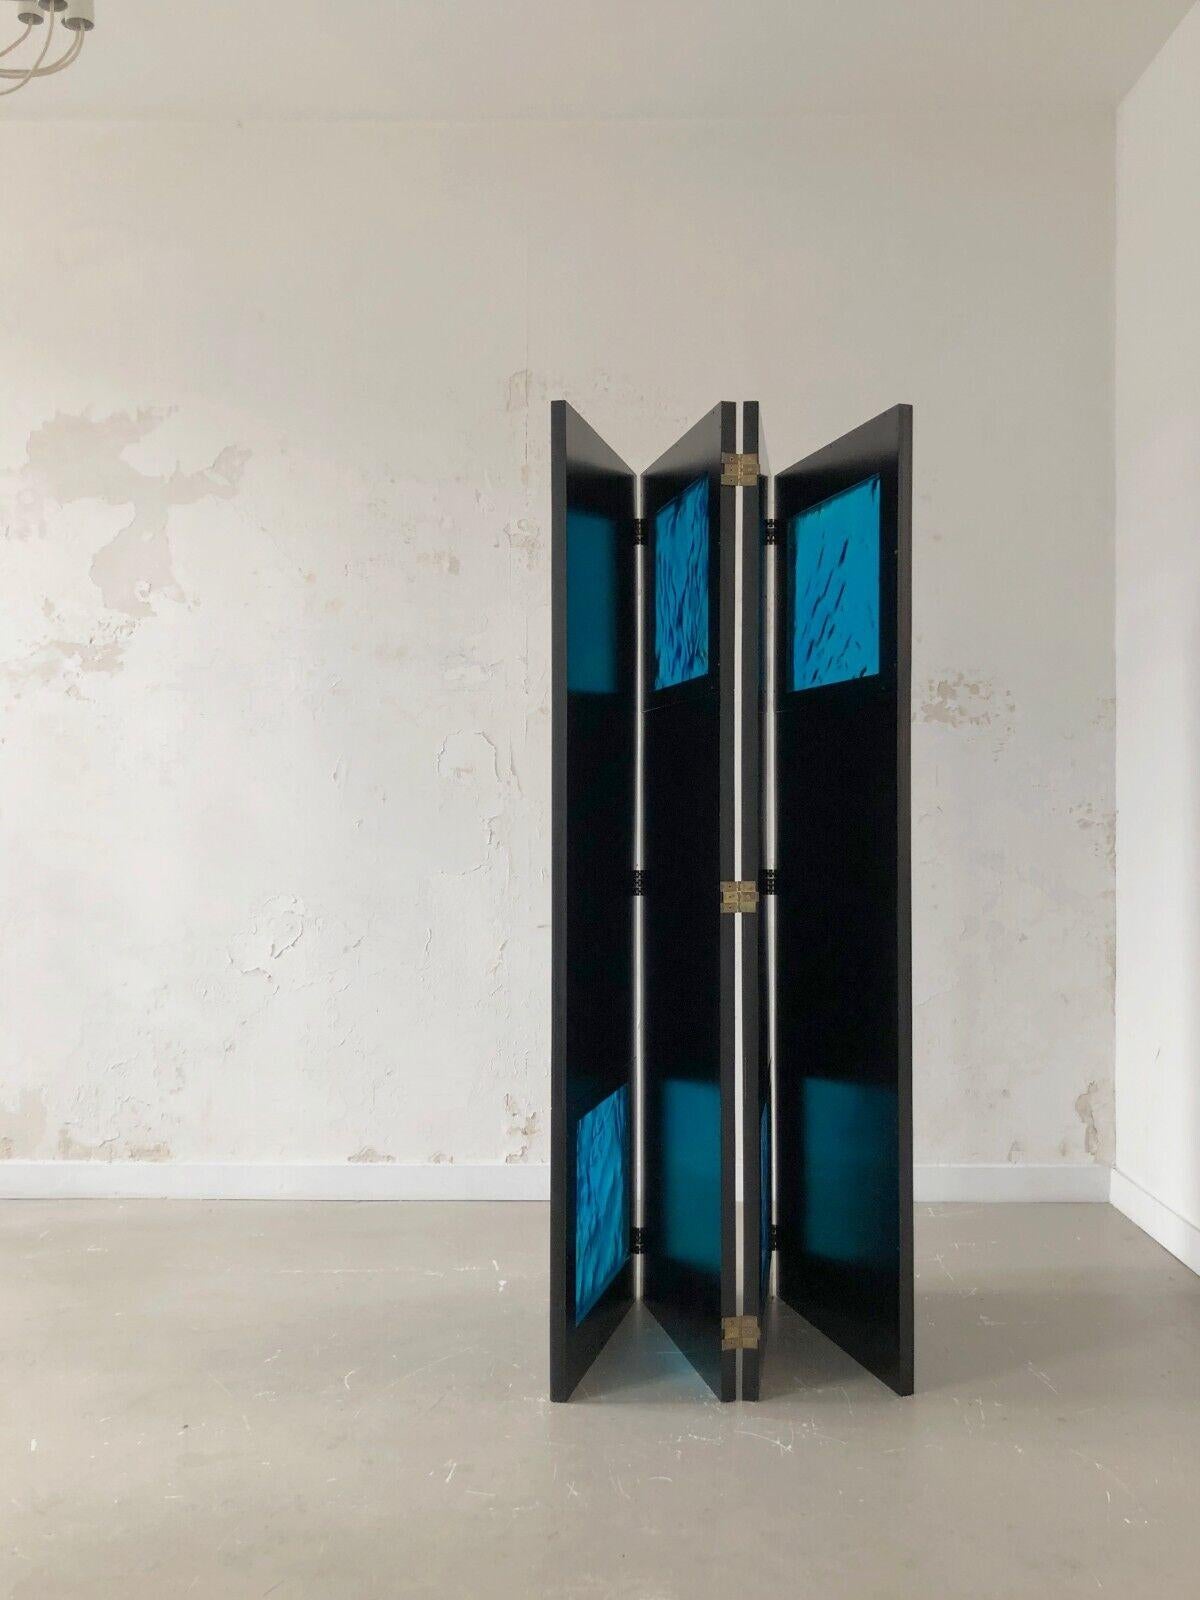 An outstanding, radical, monumental screen with 4 panels in thick black lacquered wood, with 4 exceptional massive turquoise Venini glasses, displayed alternatively at the bottom and at the top of each panel. Every piece of the blown glass is unique